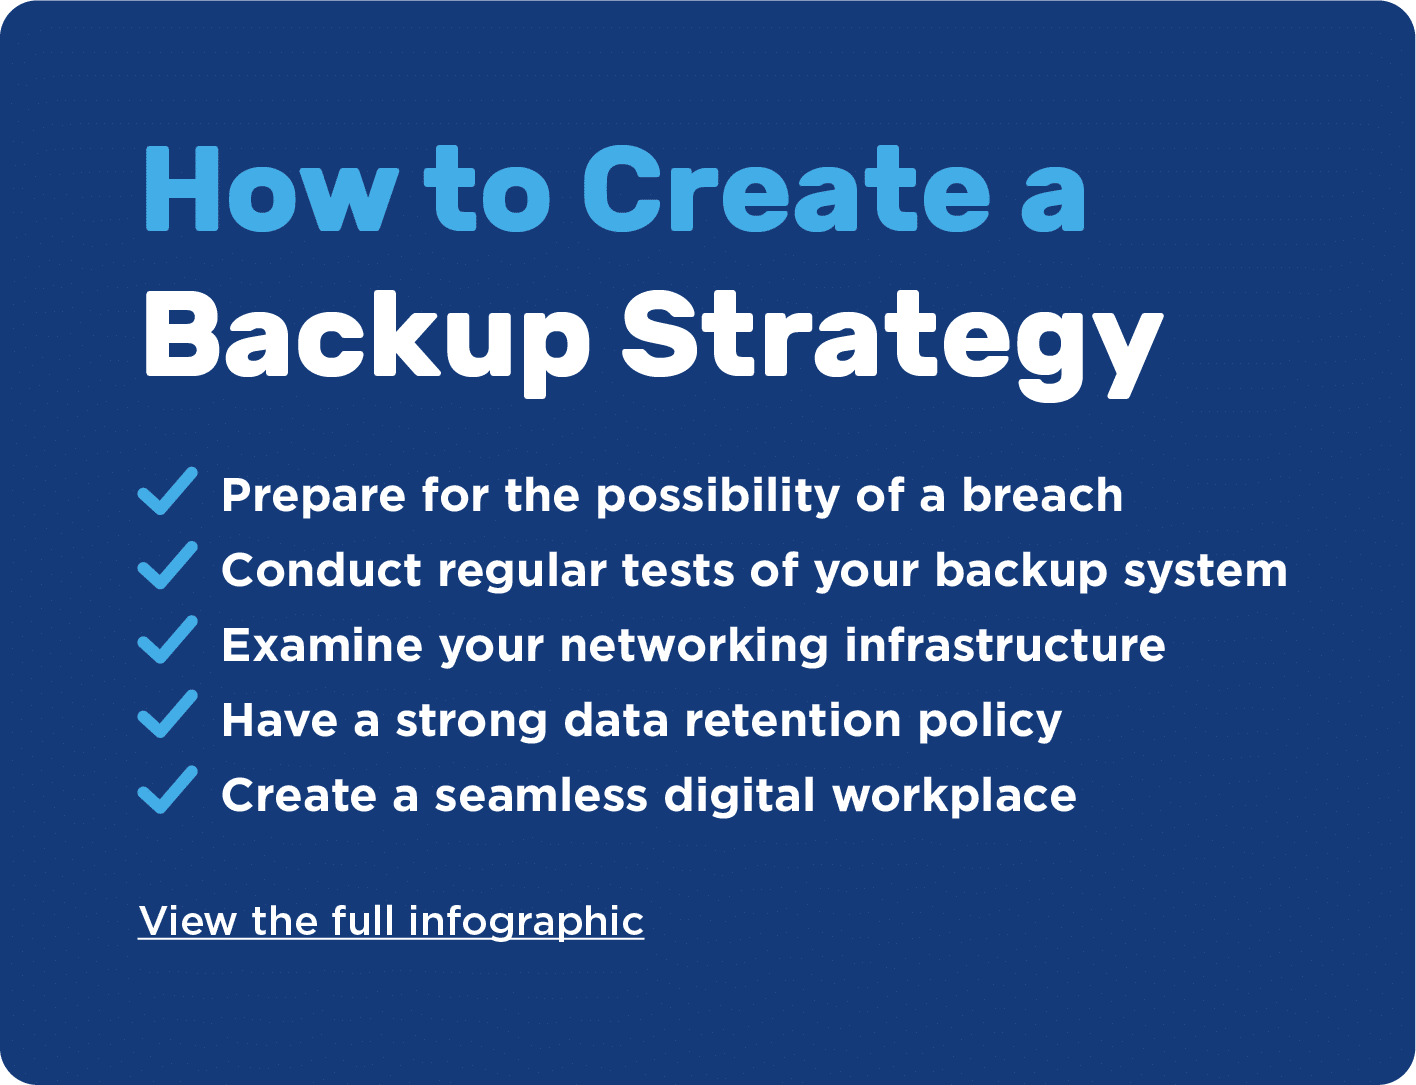 How to create a backup strategy 1 Prepare for the possibility of a breach 2 Conduct regular tests of your backup system 3 Examine your networking infrastructure 4 Have a strong data retention policy 5 Create a seamless digital workplace. View the full infographic.